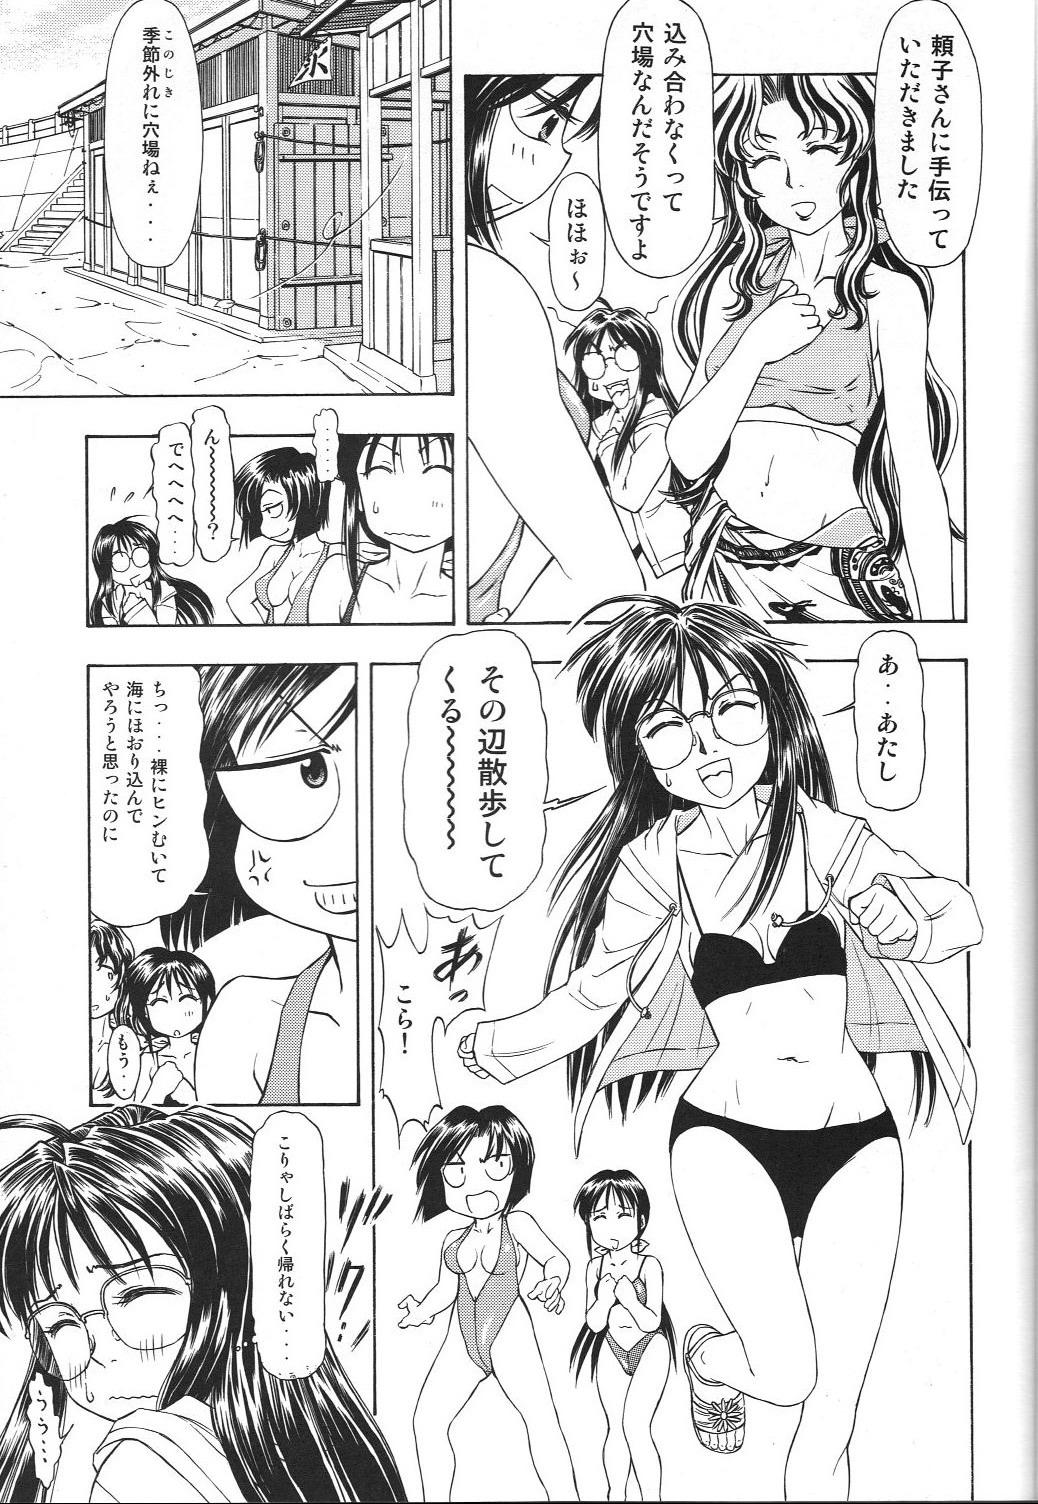 Ride TAIHO++ file02 - Youre under arrest Arrecha - Page 8